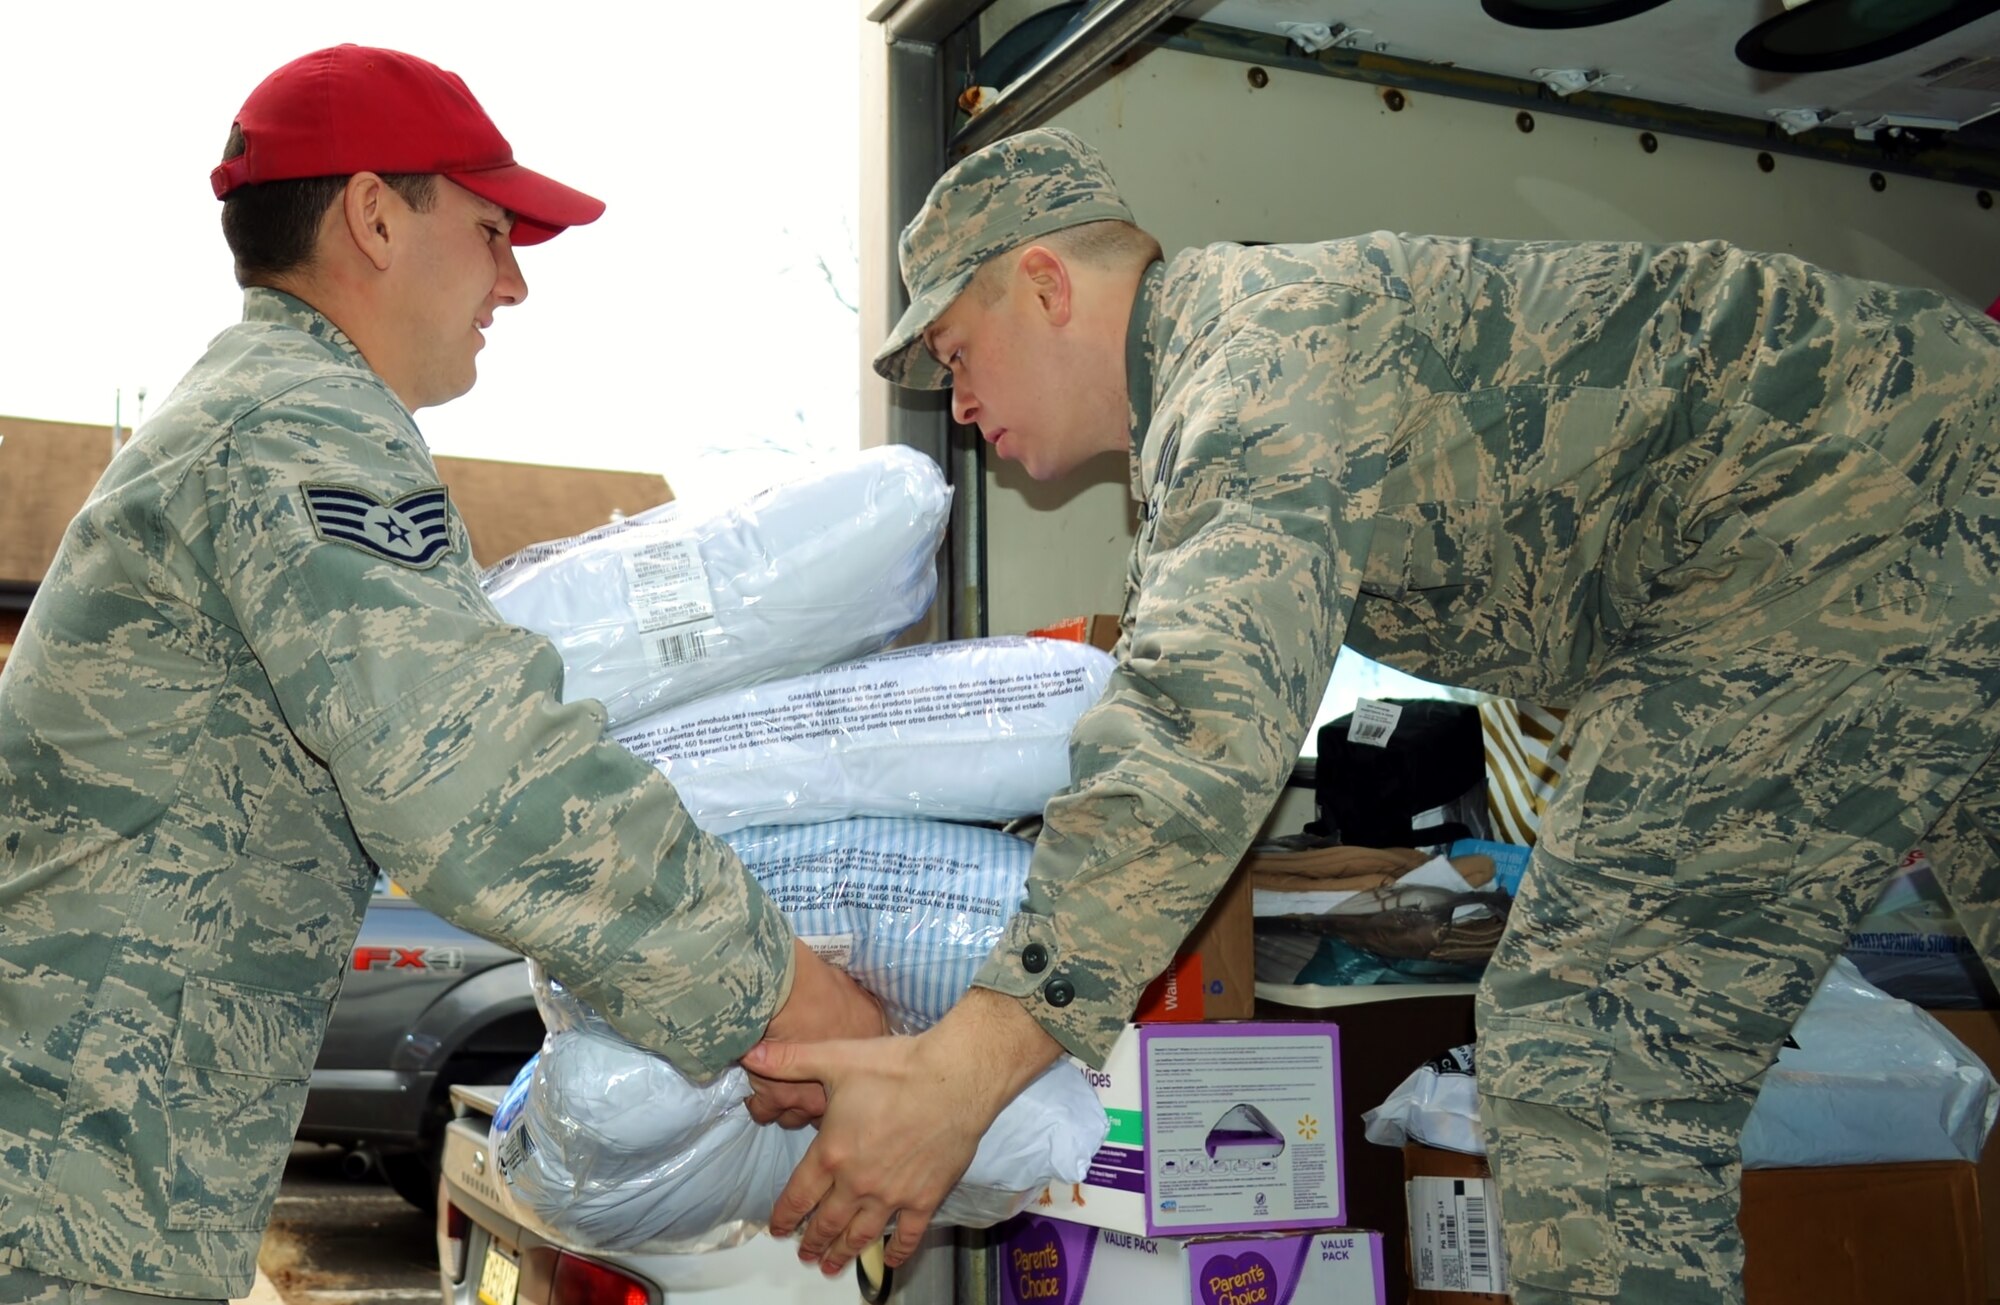 On right, Senior Airman Igor Karlov, 111th Logistics Readiness Squadron supply technician, receives donated items from a member of the 201st Rapid Engineer Deployable Heavy Operational Repair Squadron Engineer (RED HORSE) Squadron, Det. 1, Dec. 15, 2016 at Horsham Air Guard Station, Pa. The 111th Attack Wing has donated toys and other items to a local children’s care facility for more than two decades. (U.S. Air National Guard photo by Tech. Sgt. Andria Allmond)
